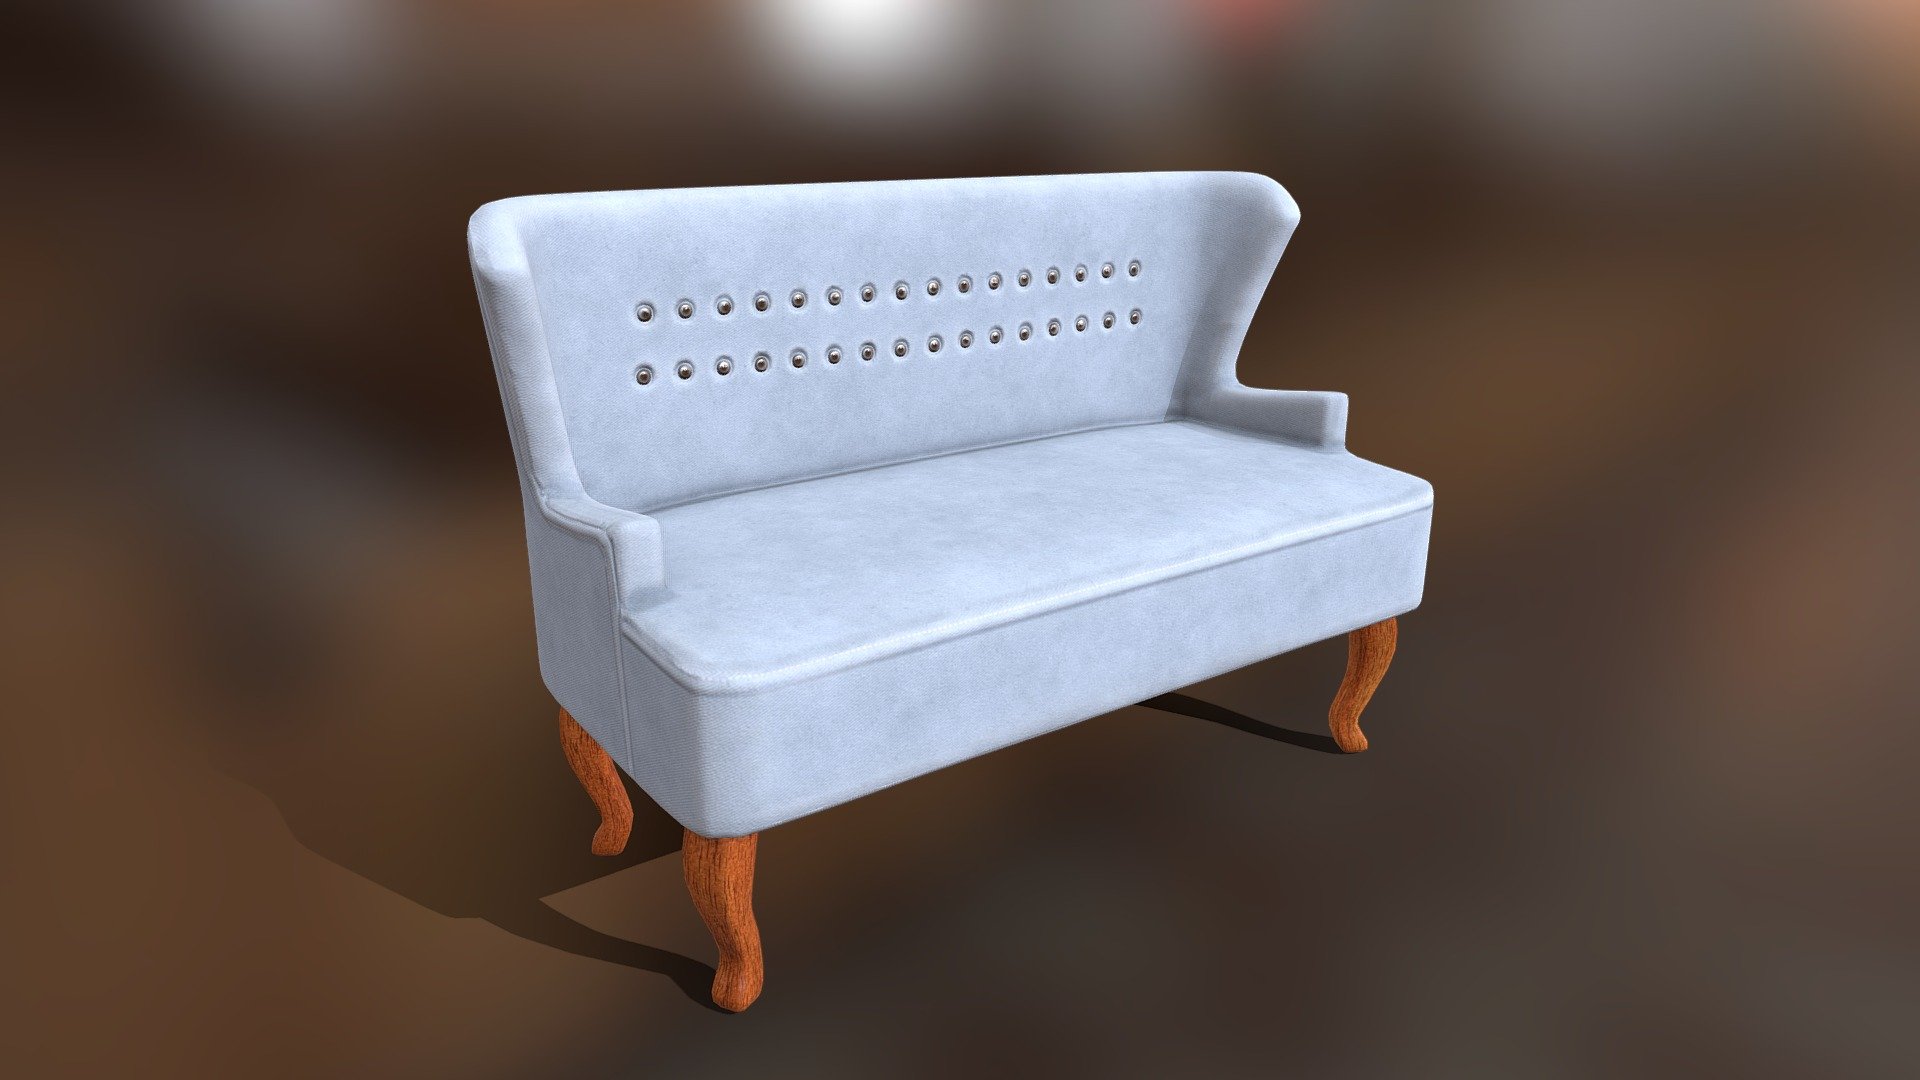 Model of a Dahlia couch Designed at medium poly for best results in sketchfab browser and mobile.
Want to change the color?  &hellip; Don't worry!  I have uploaded an additional file that contains:
- base mesh (both high and low resolution).
- Substance Painter 2019.3 file so you can make custom Material adjustments 3d model